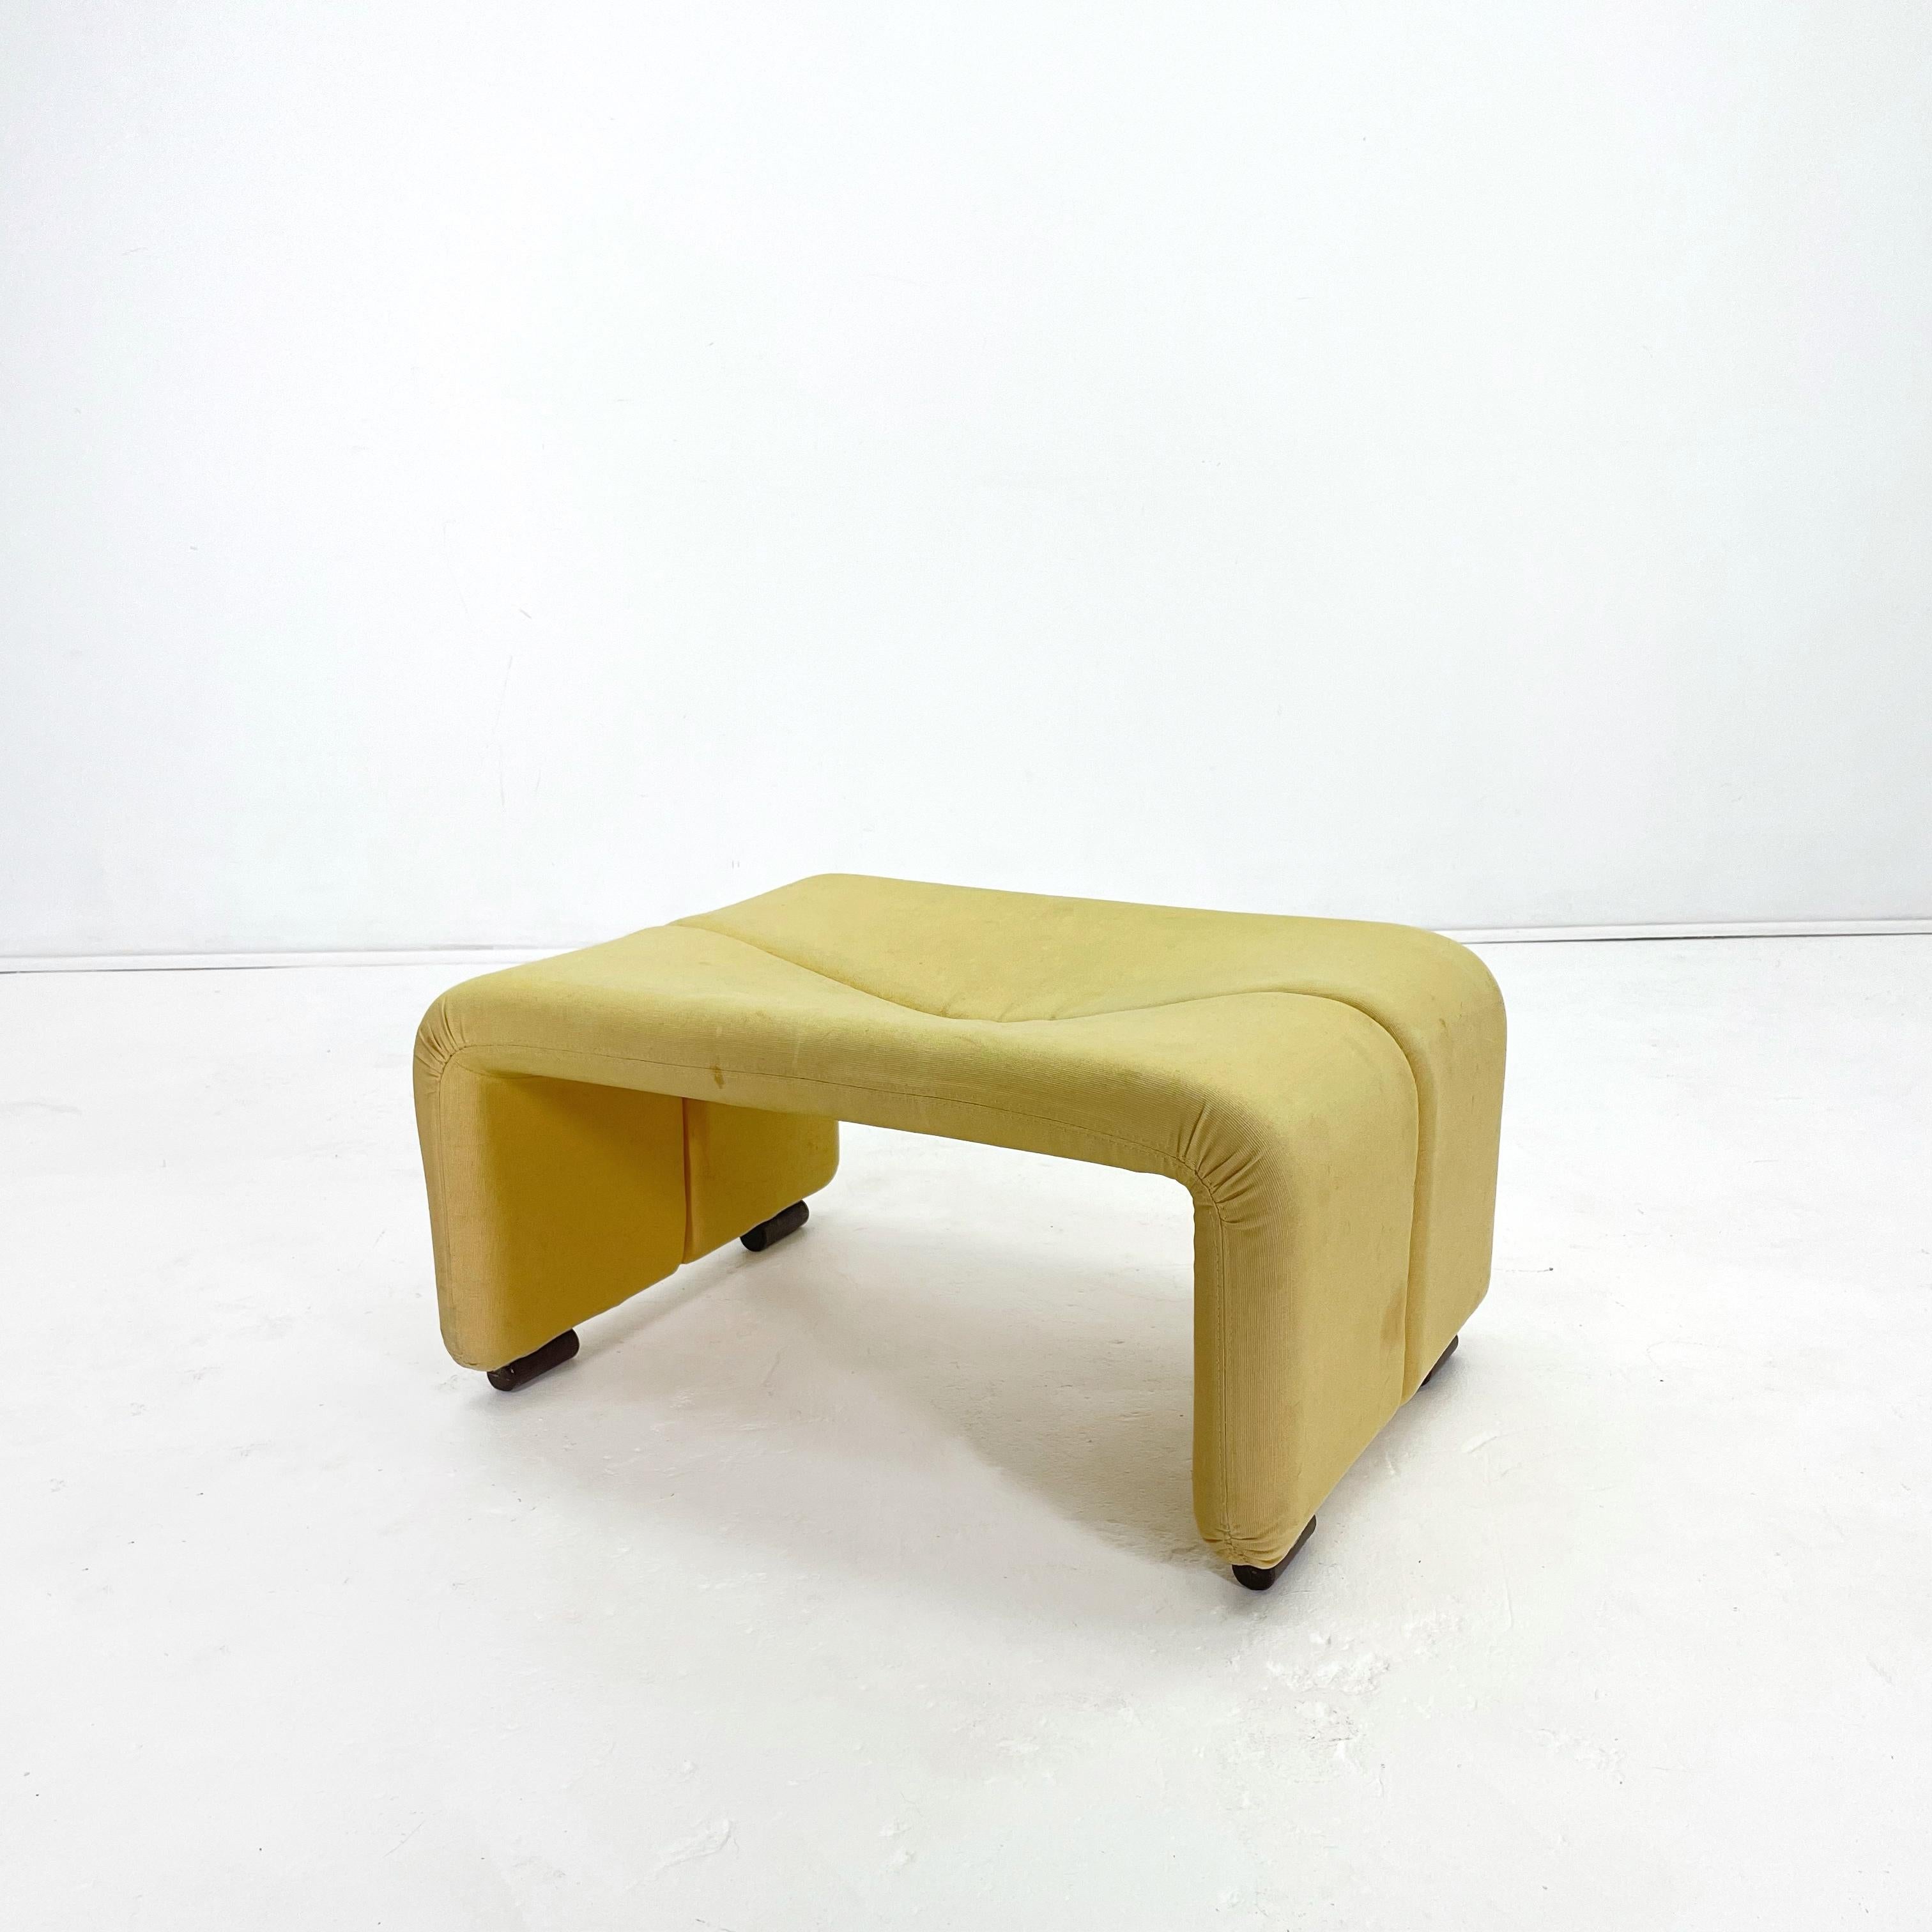 This ottoman was designed by Afra and Tobia Scarpa for their 